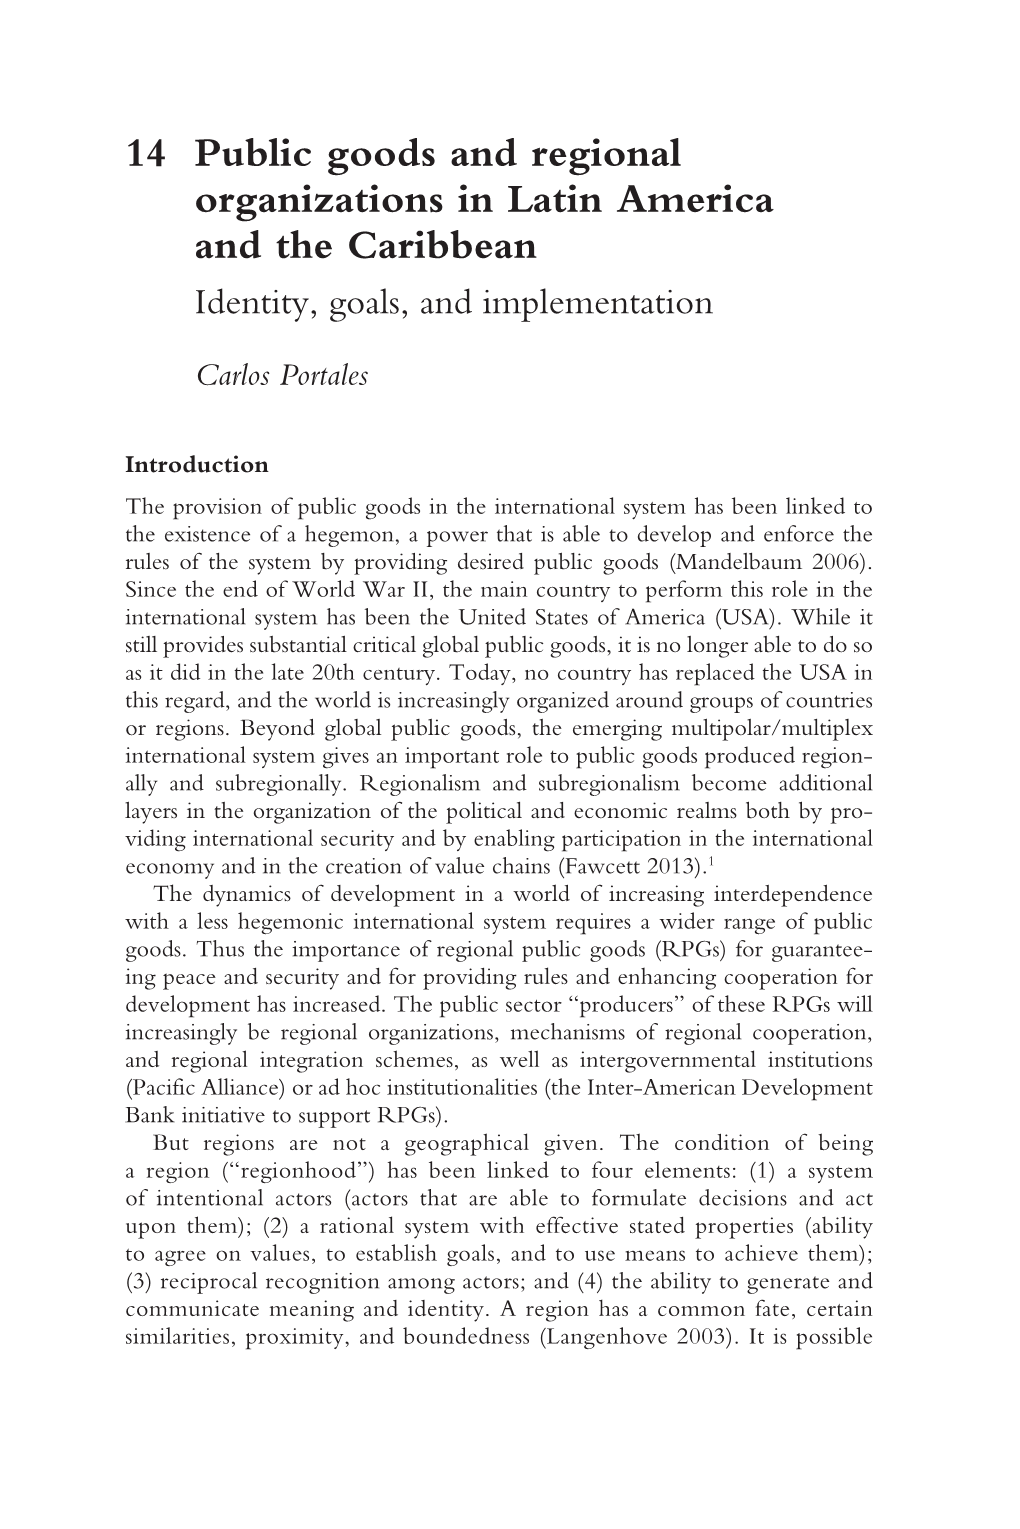 14 Public Goods and Regional Organizations in Latin America and the Caribbean Identity, Goals, and Implementation